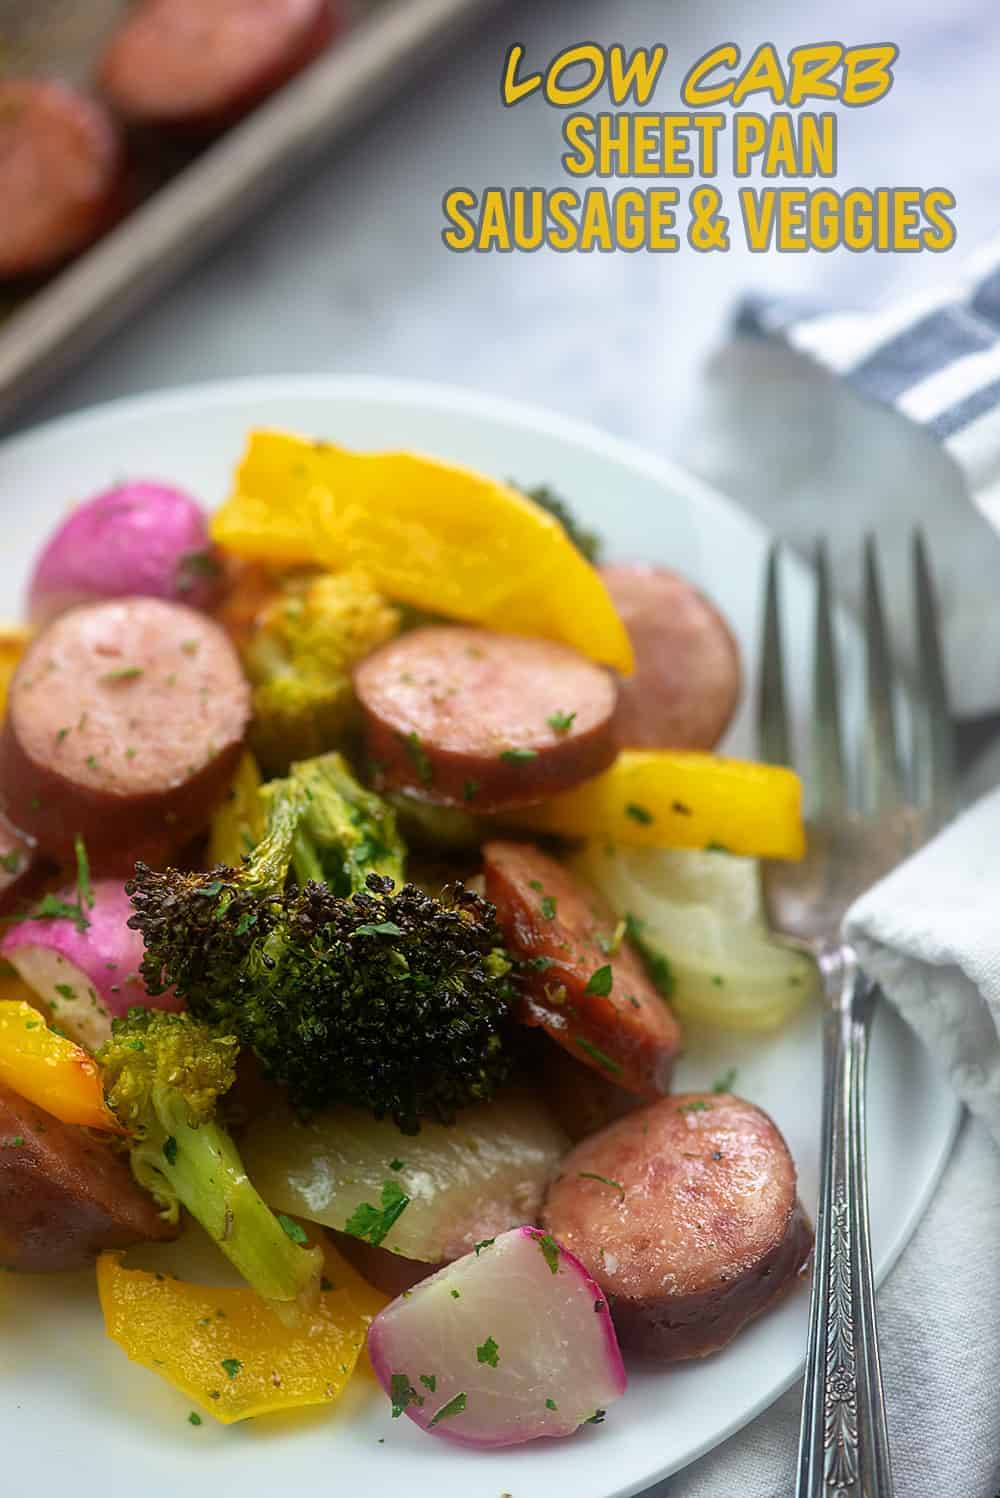 A plate of sausage and veggies with a fork on it.